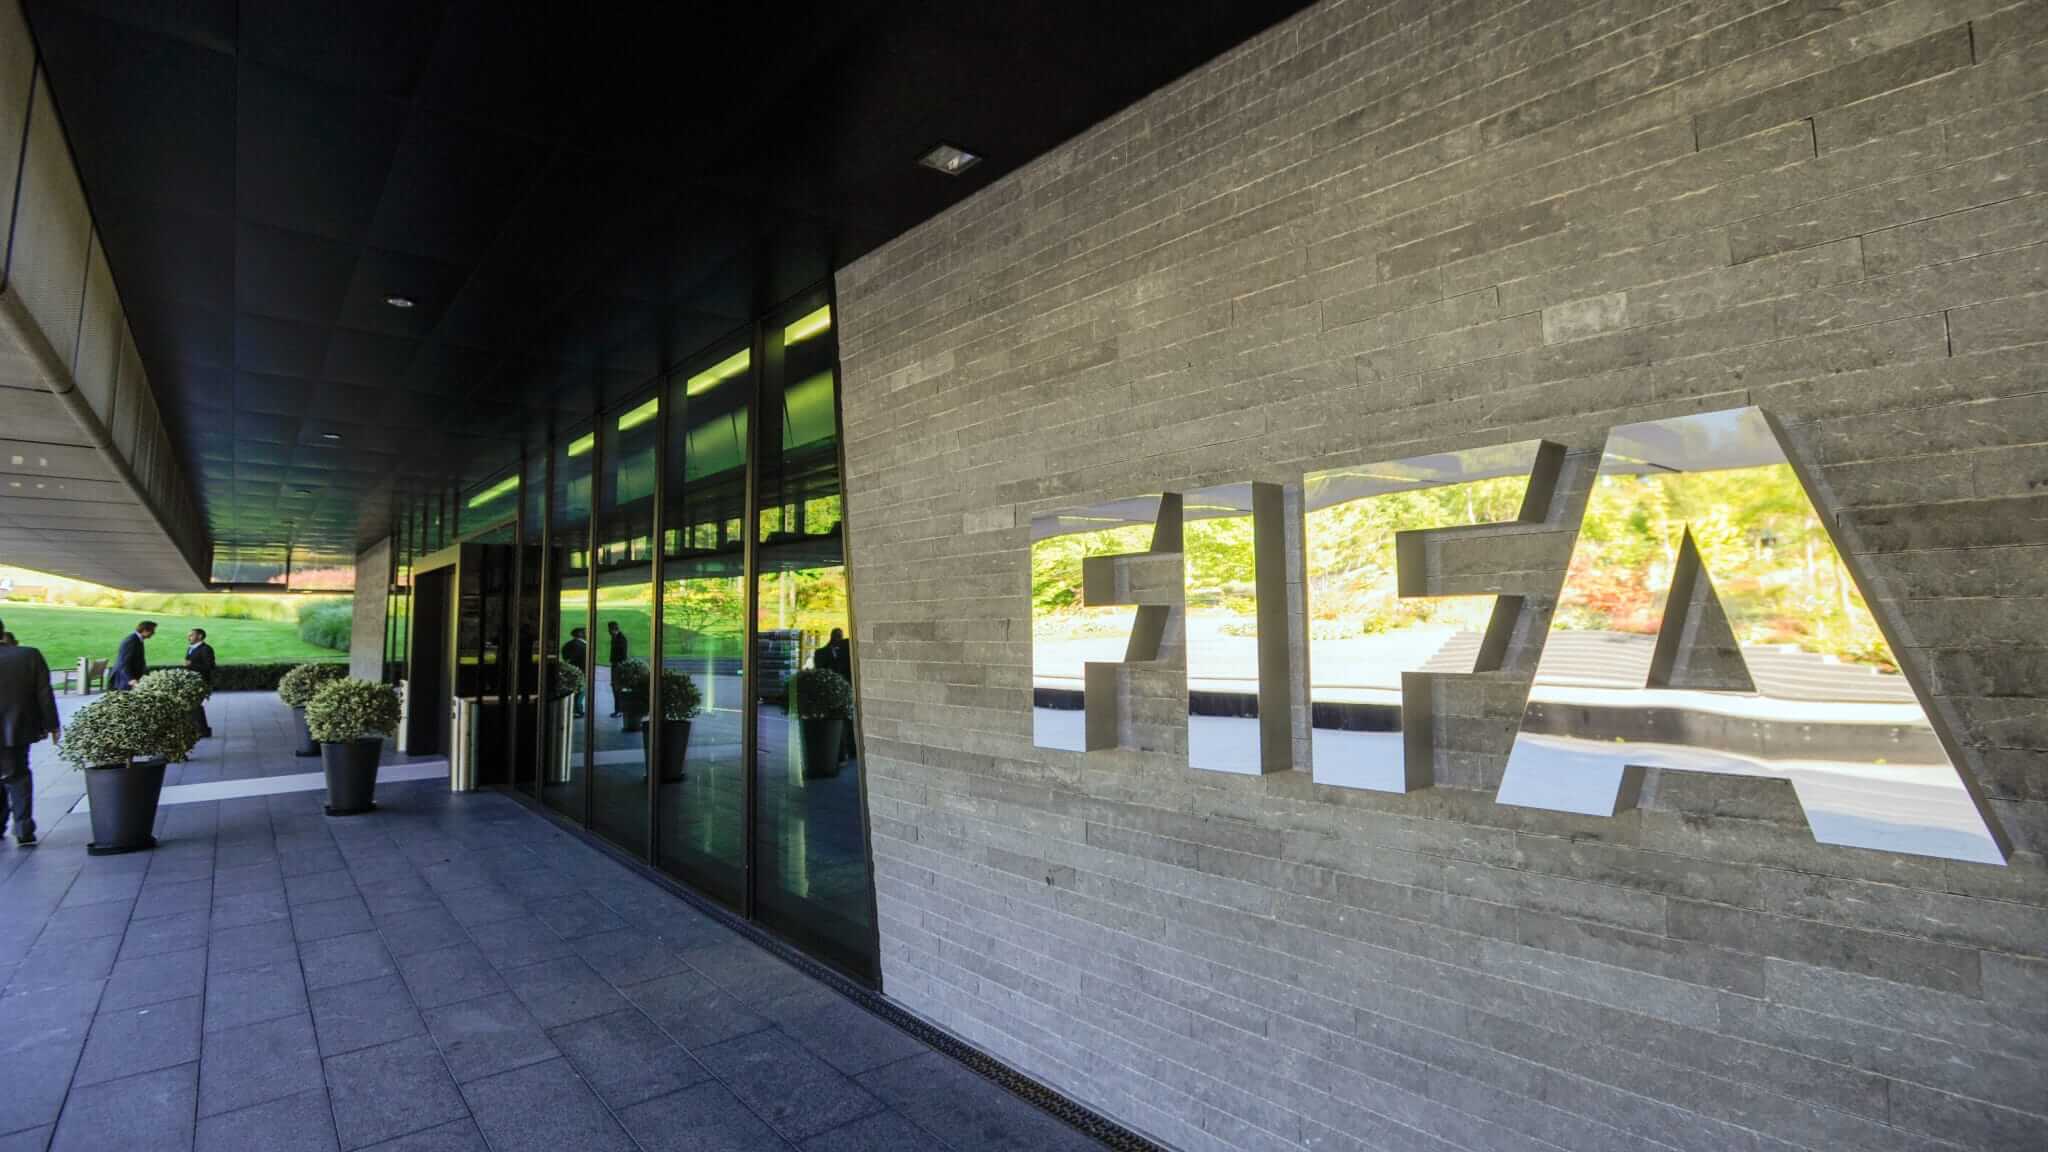 The FIFA headquarters entrance in Zurich